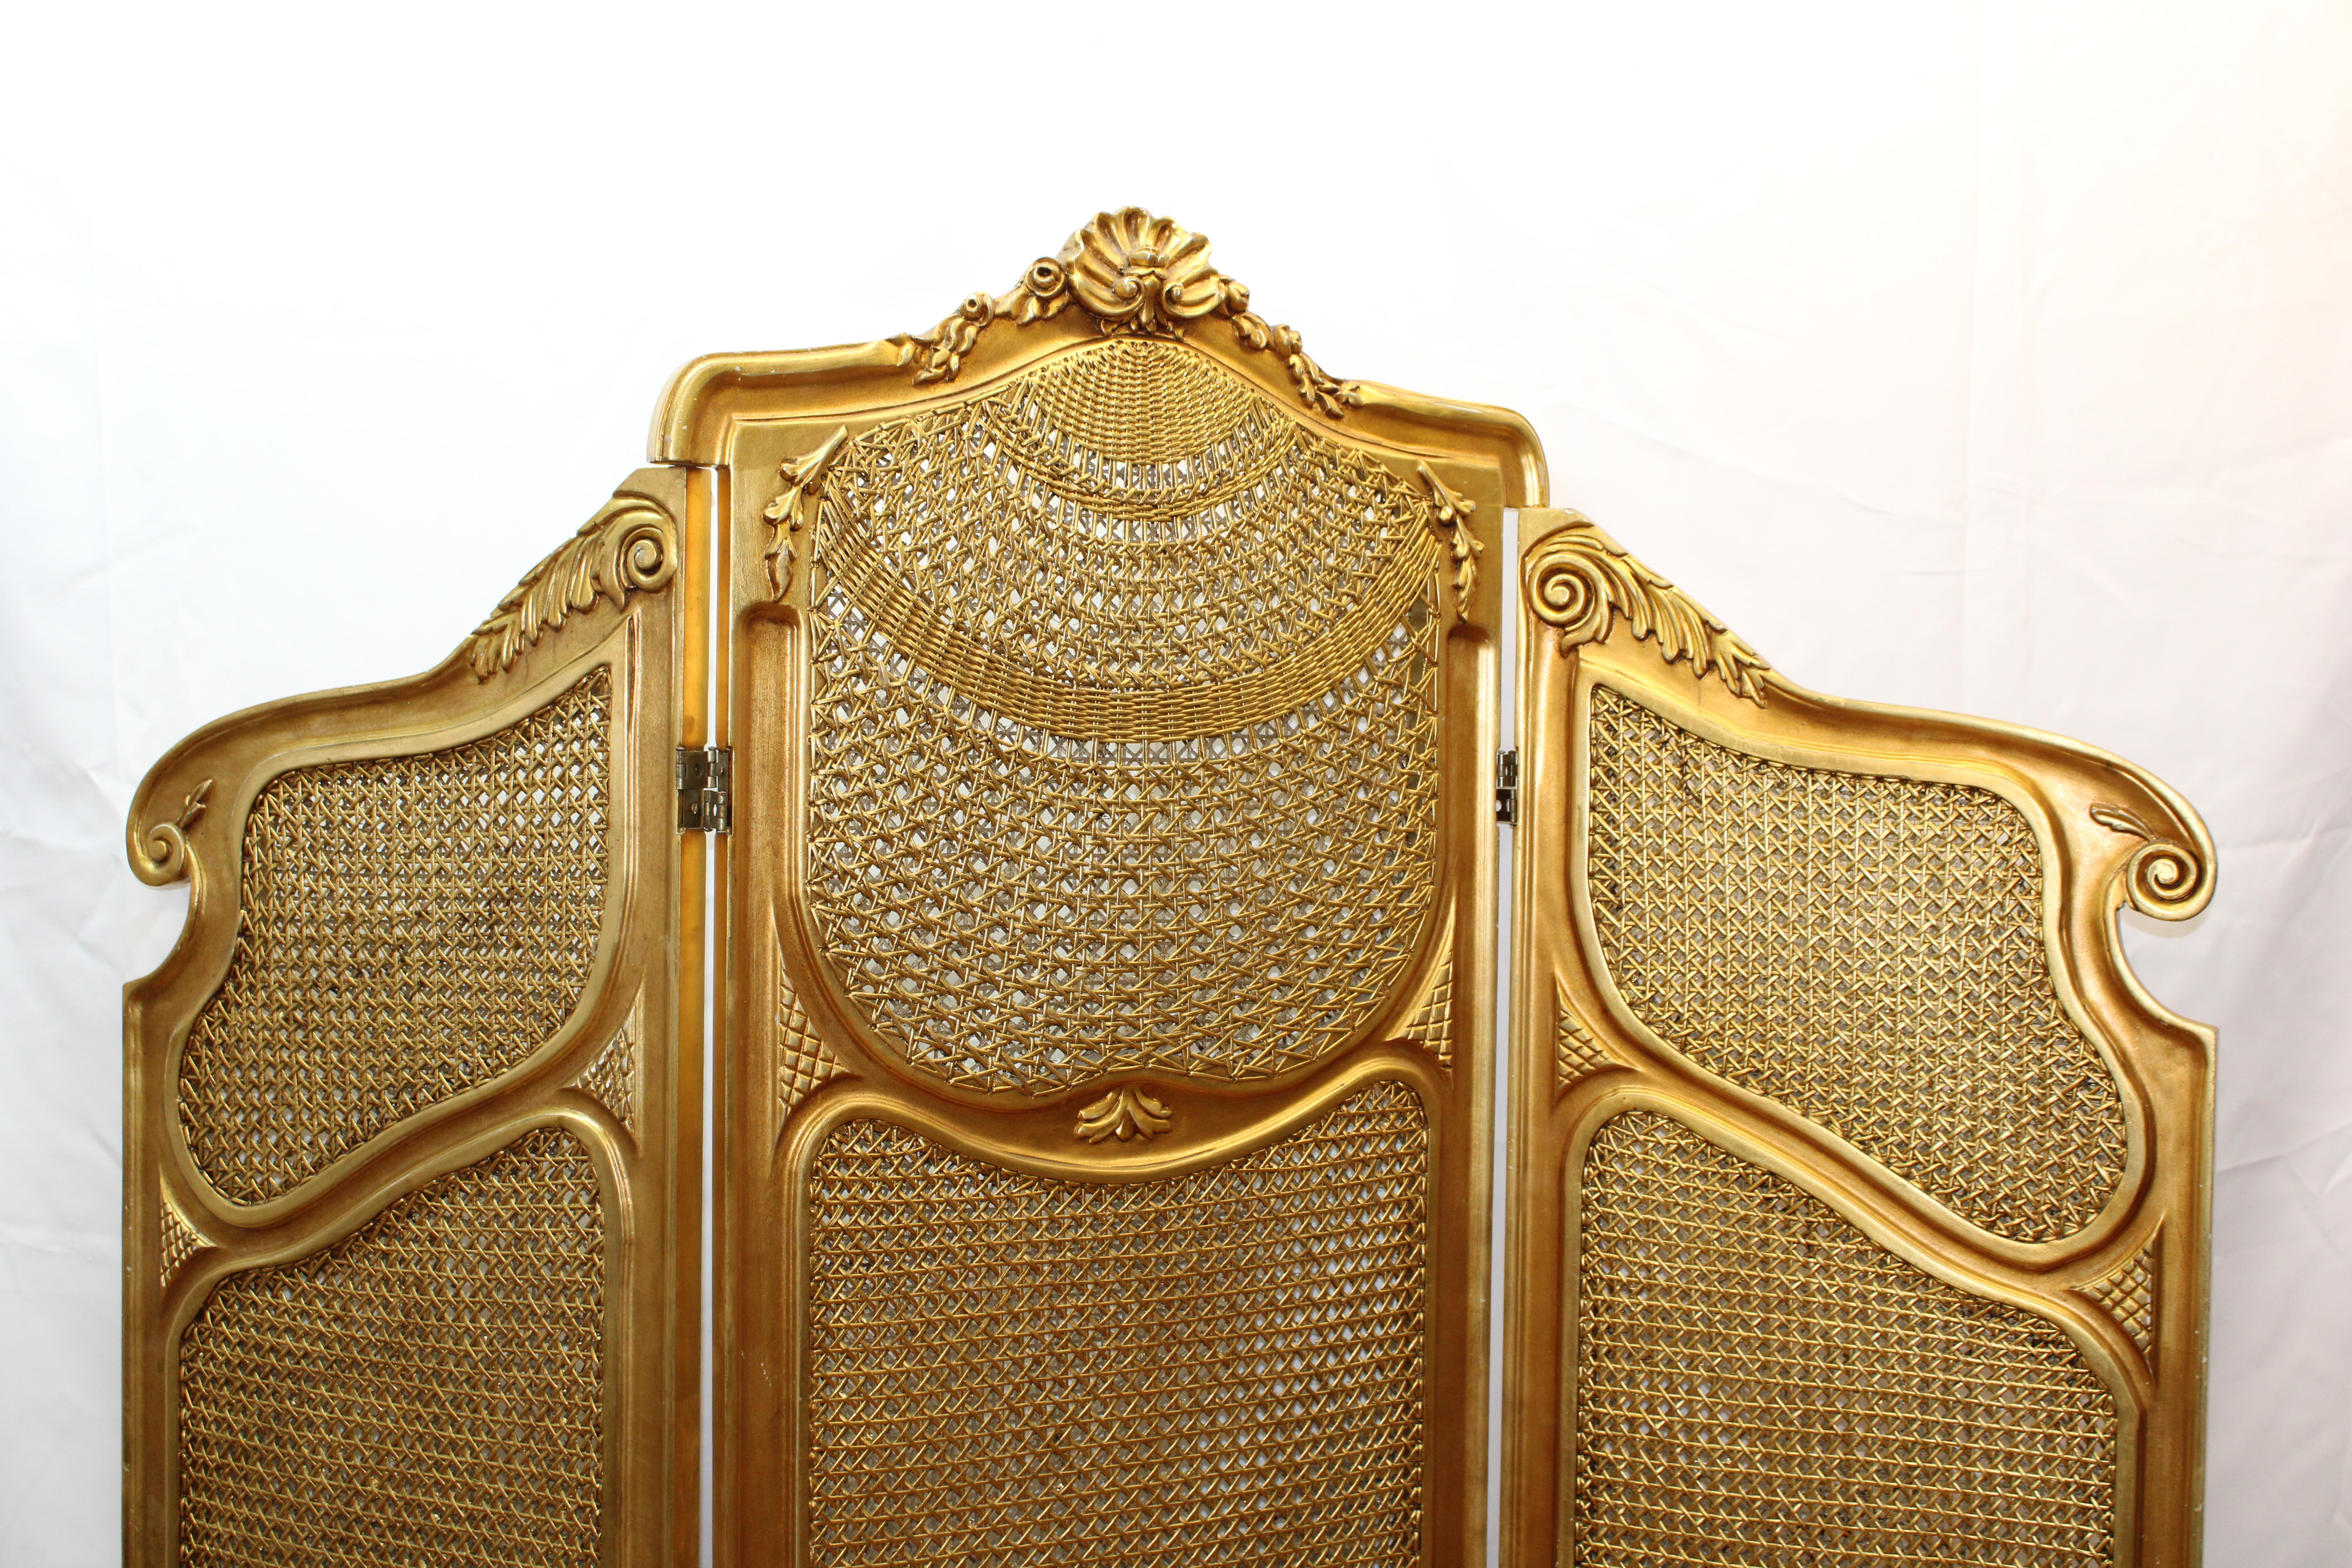 French caned and gilded early 20th century screen, hand carved shell and floral design

The 2 end panels are 18